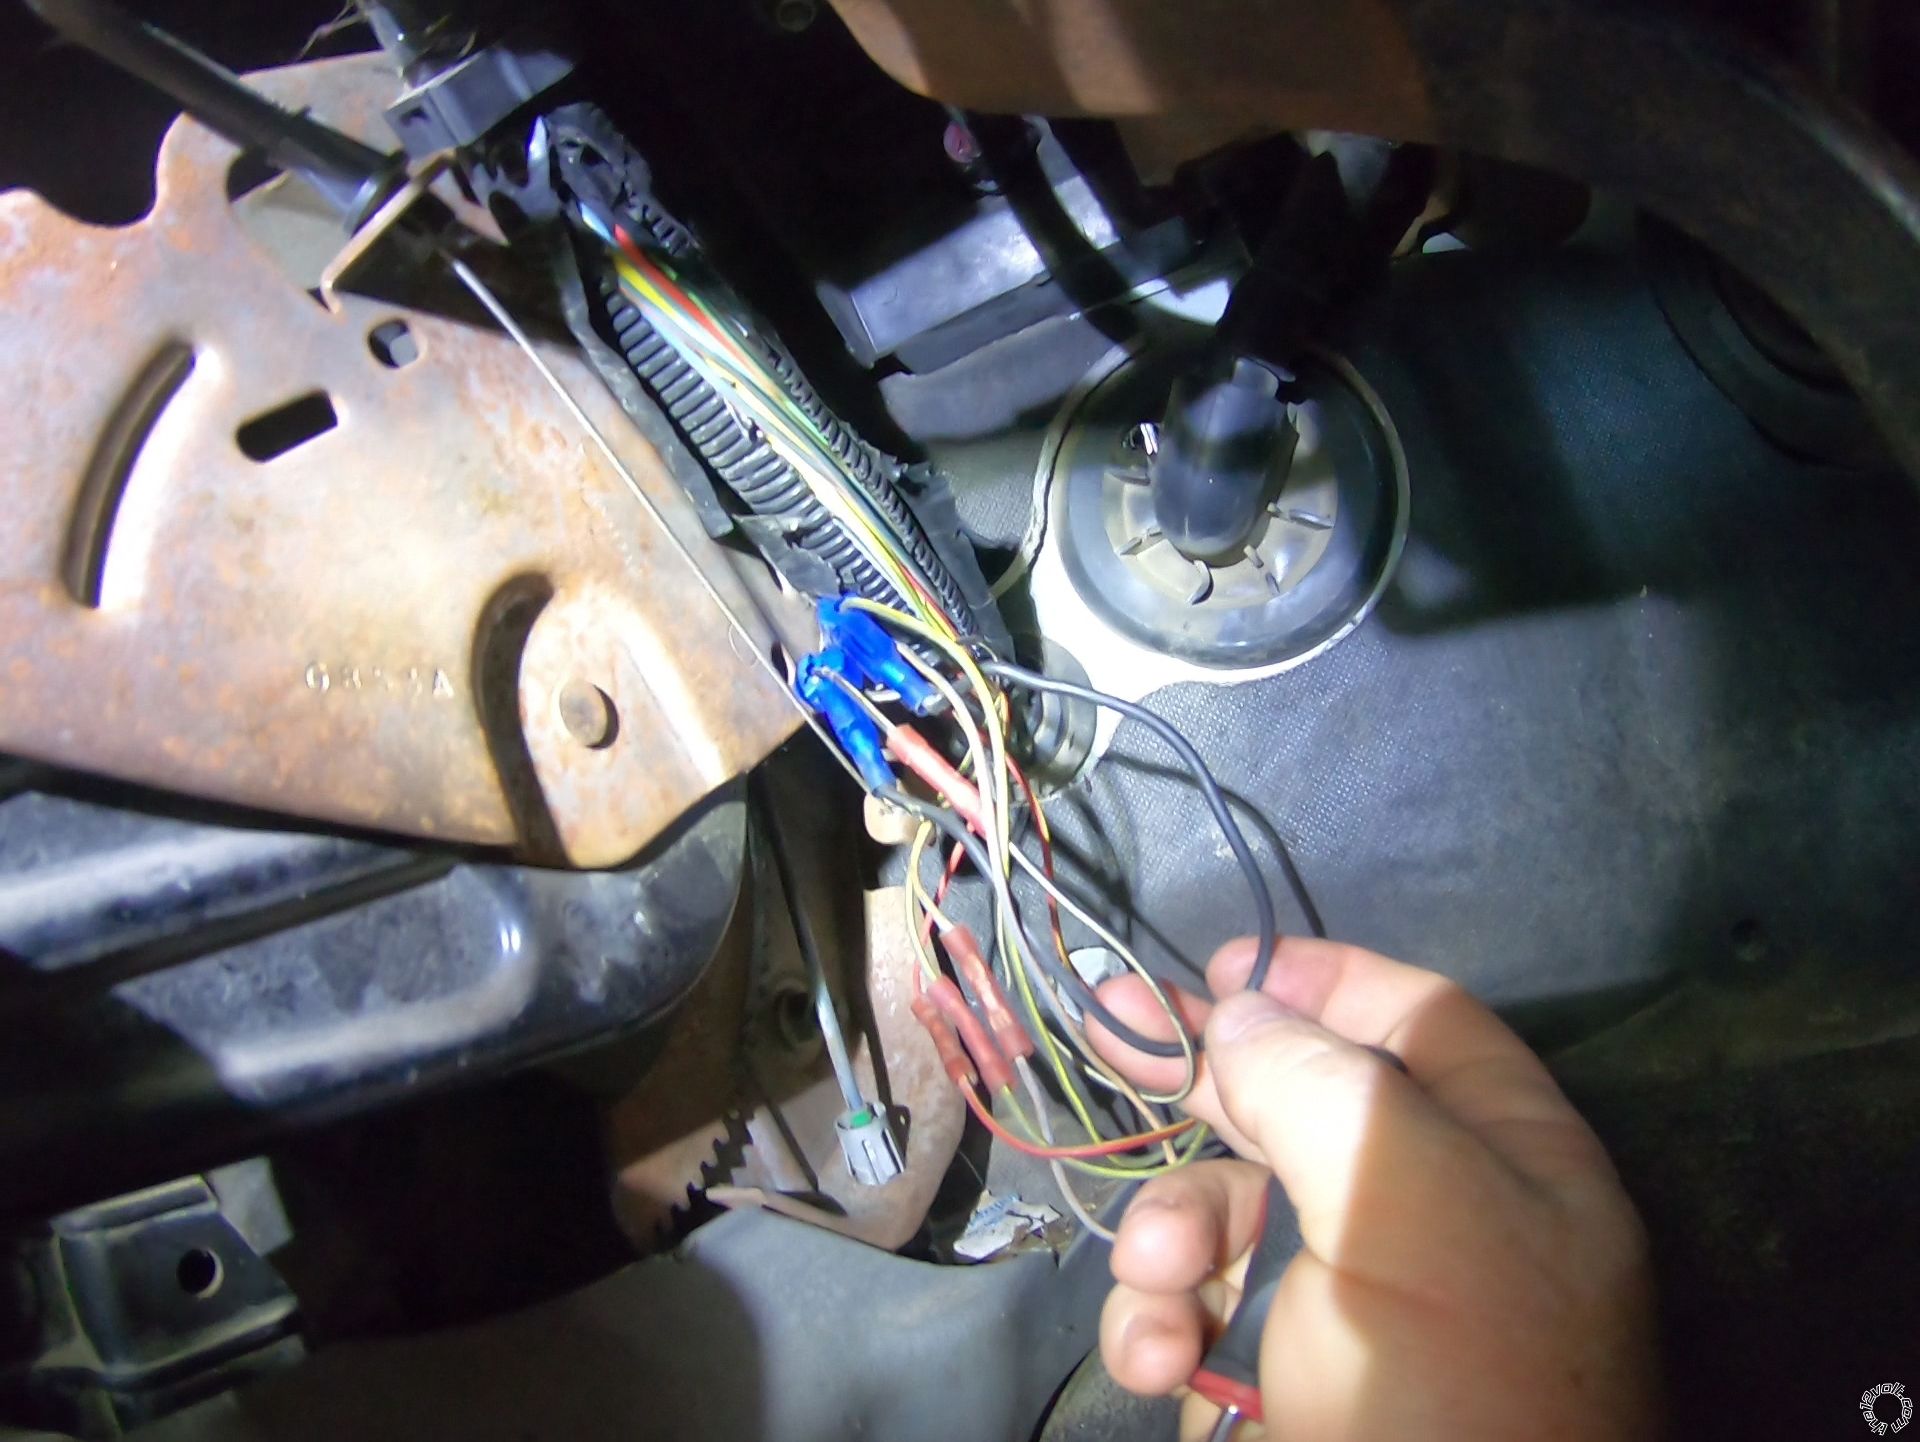 2007 Ford F-550, PO Installed Cross Over Wire, Wont Start When Removed - Last Post -- posted image.